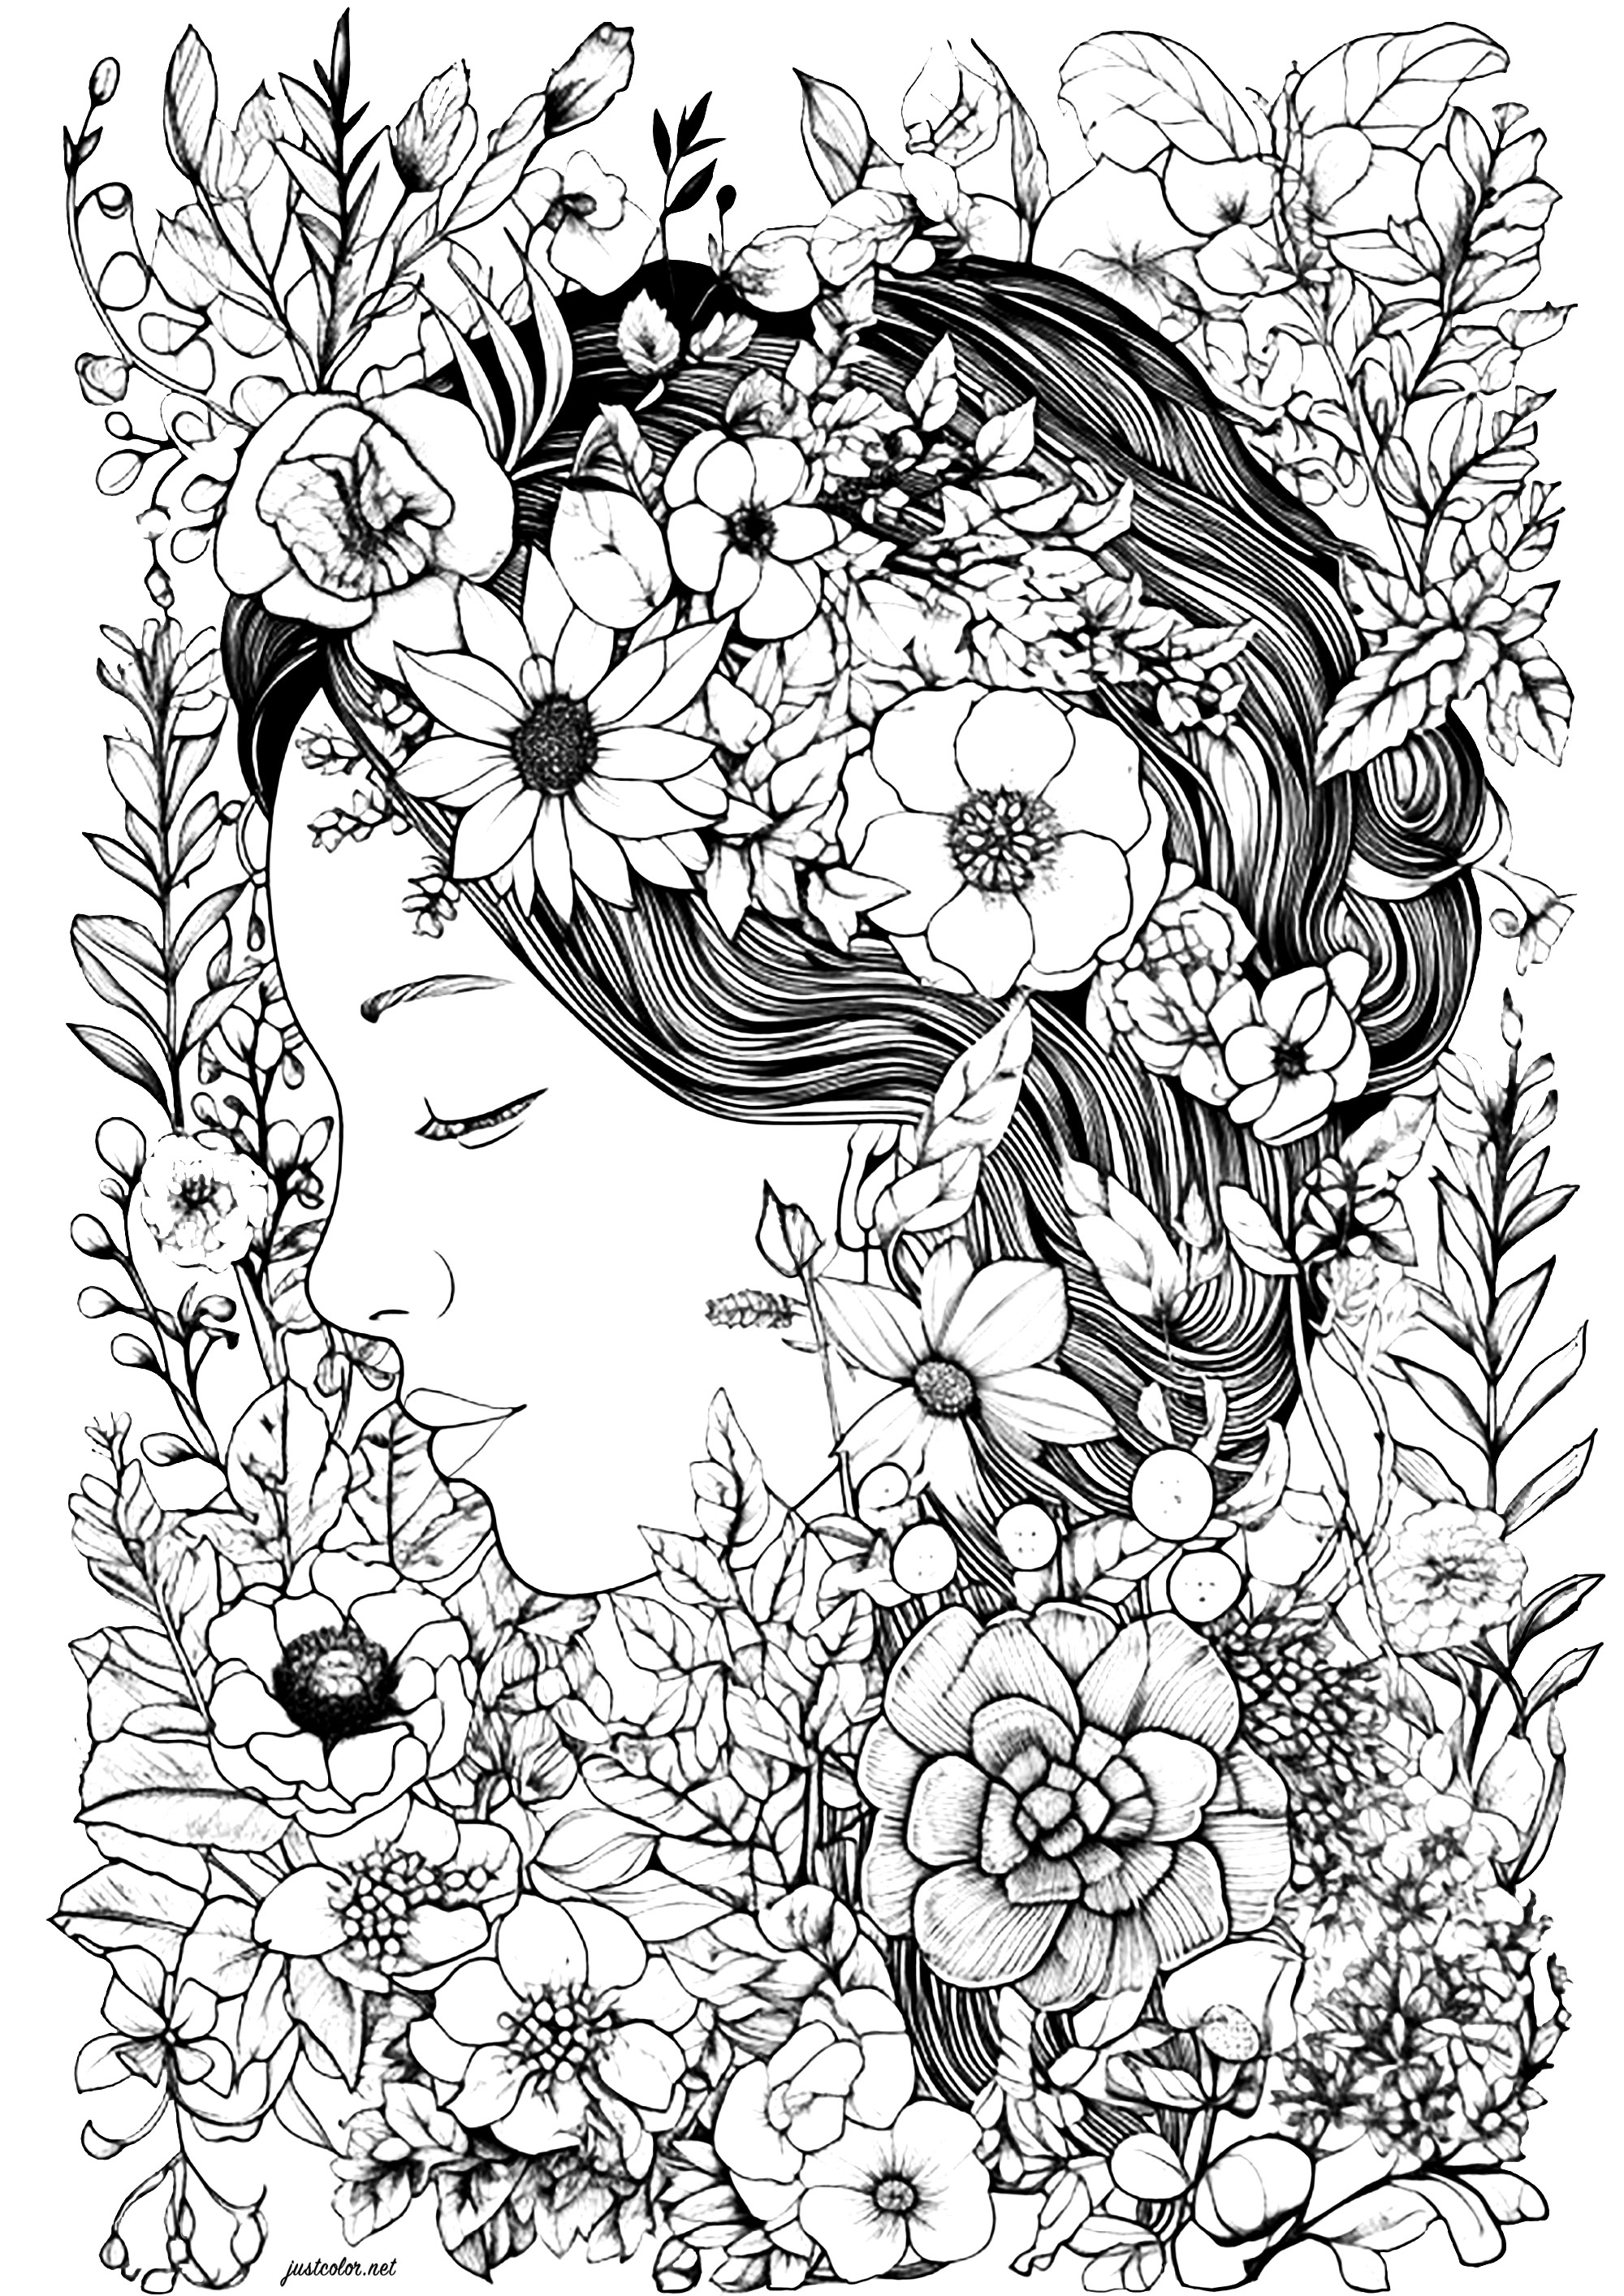 Soothing feminine face and pretty flowers. A beautiful coloring composed of flowers revealing the face of a mysterious woman